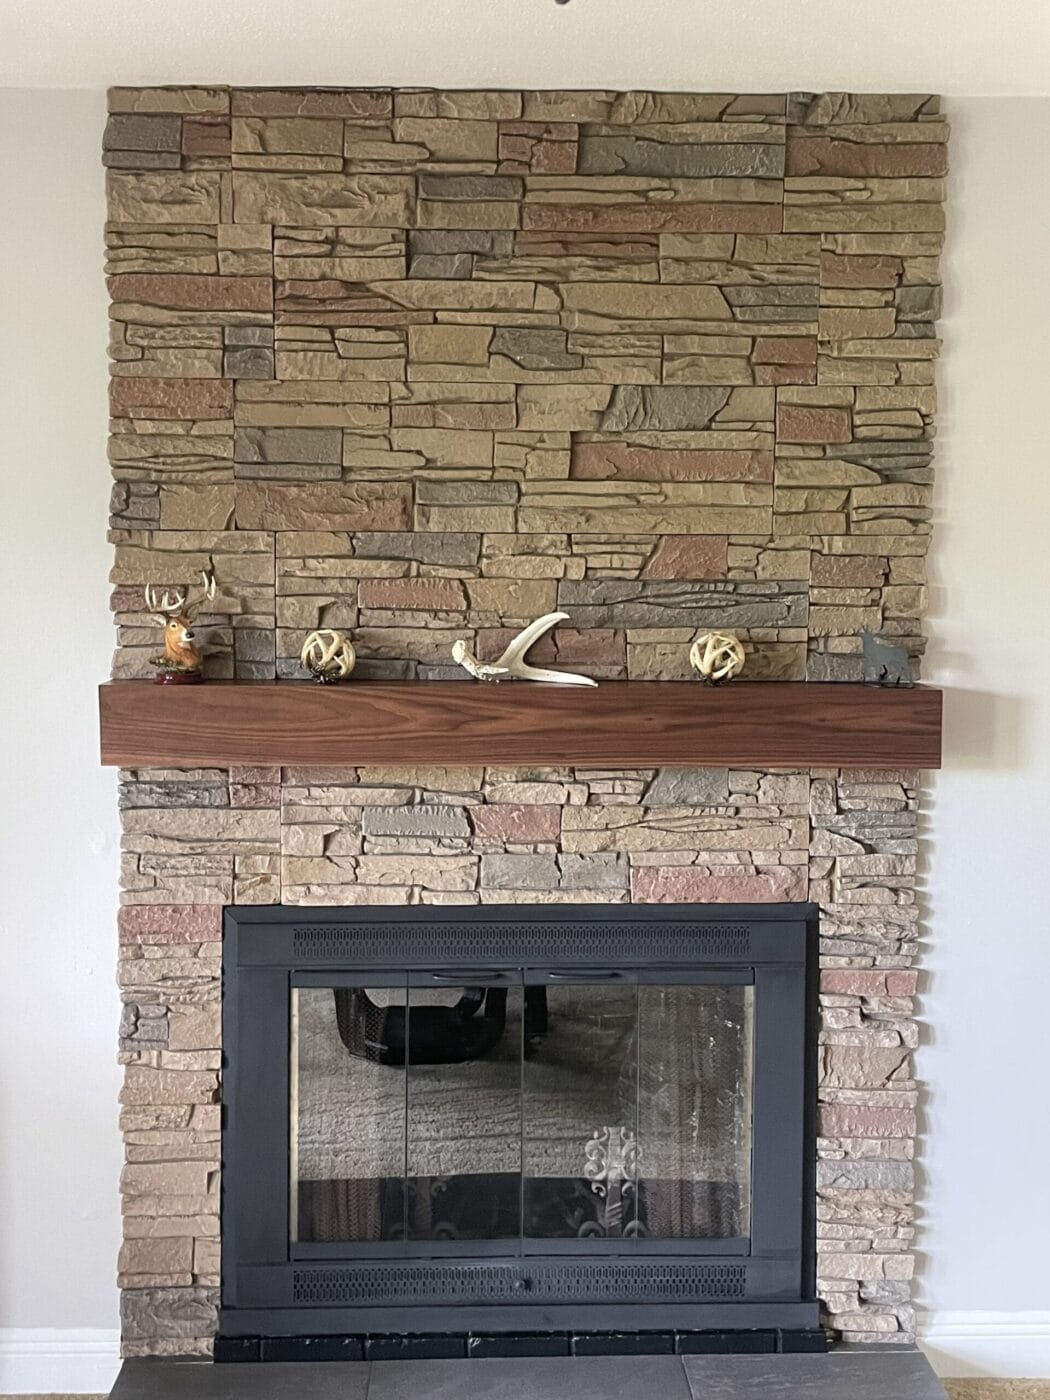 A fireplace surround project that uses GenStone's Desert Sunrise faux stone panels over brick.